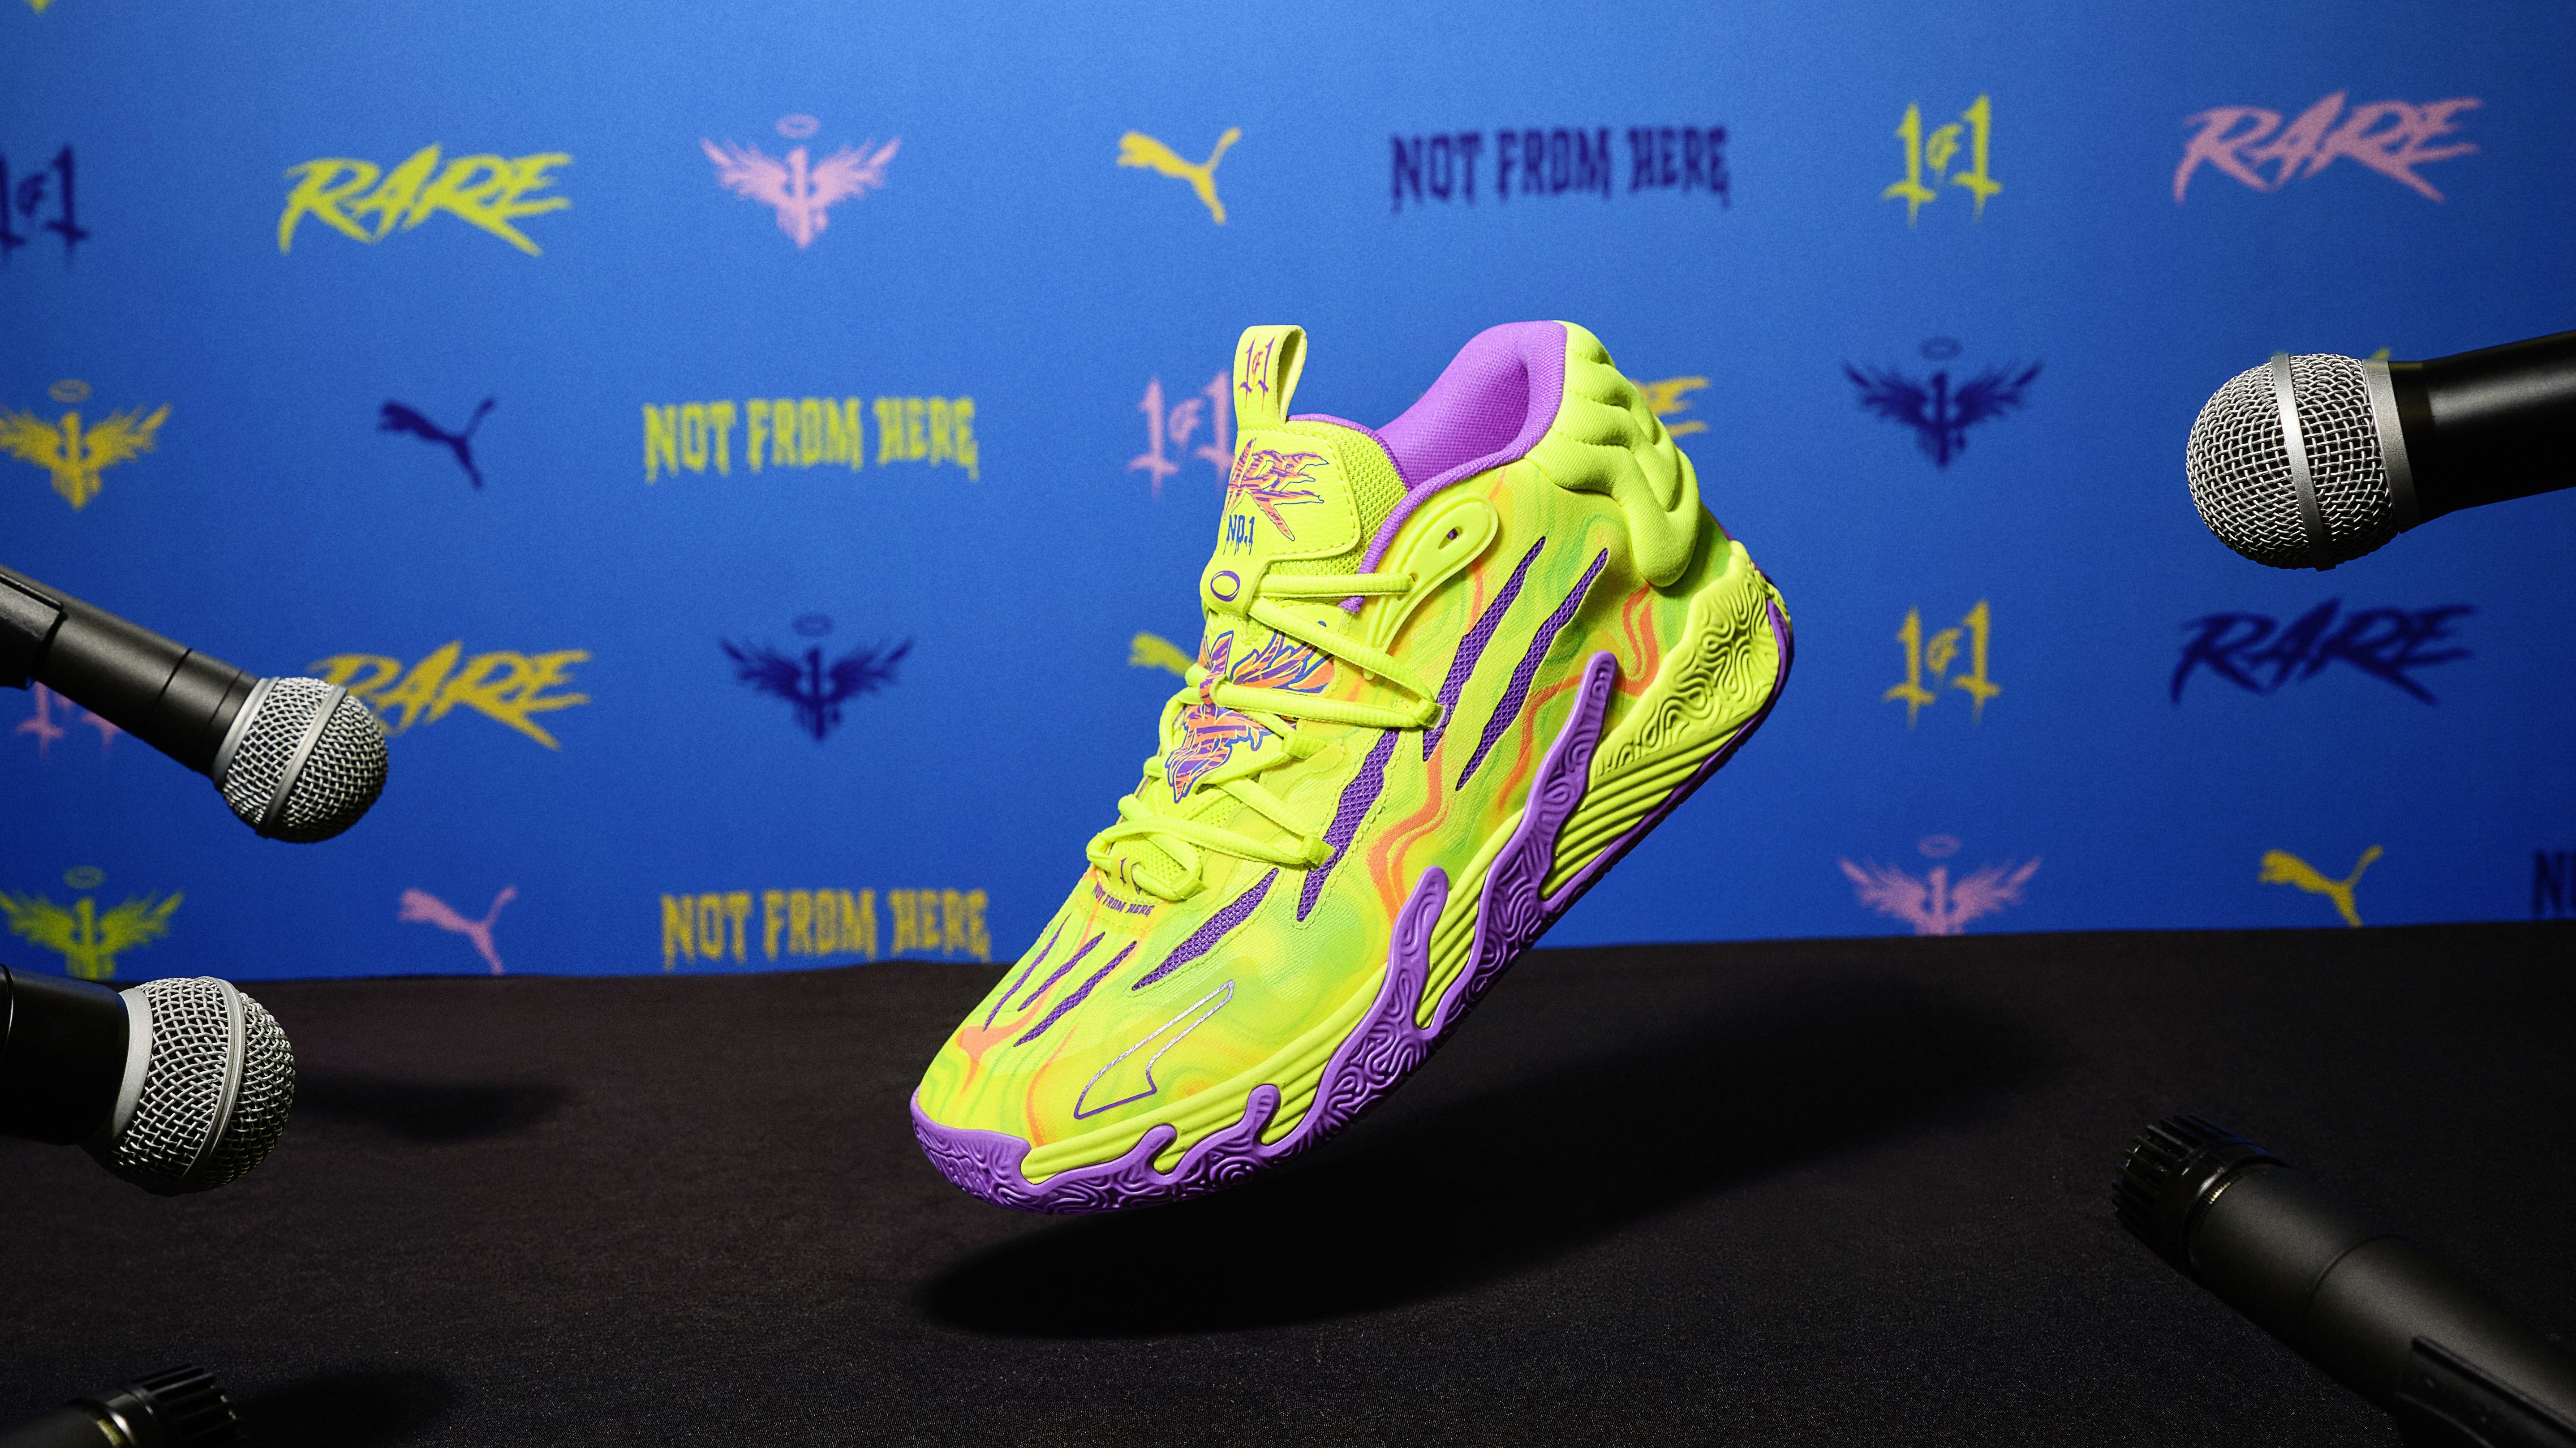 LaMelo Ball's yellow and purple PUMA sneakers sit on a podium.